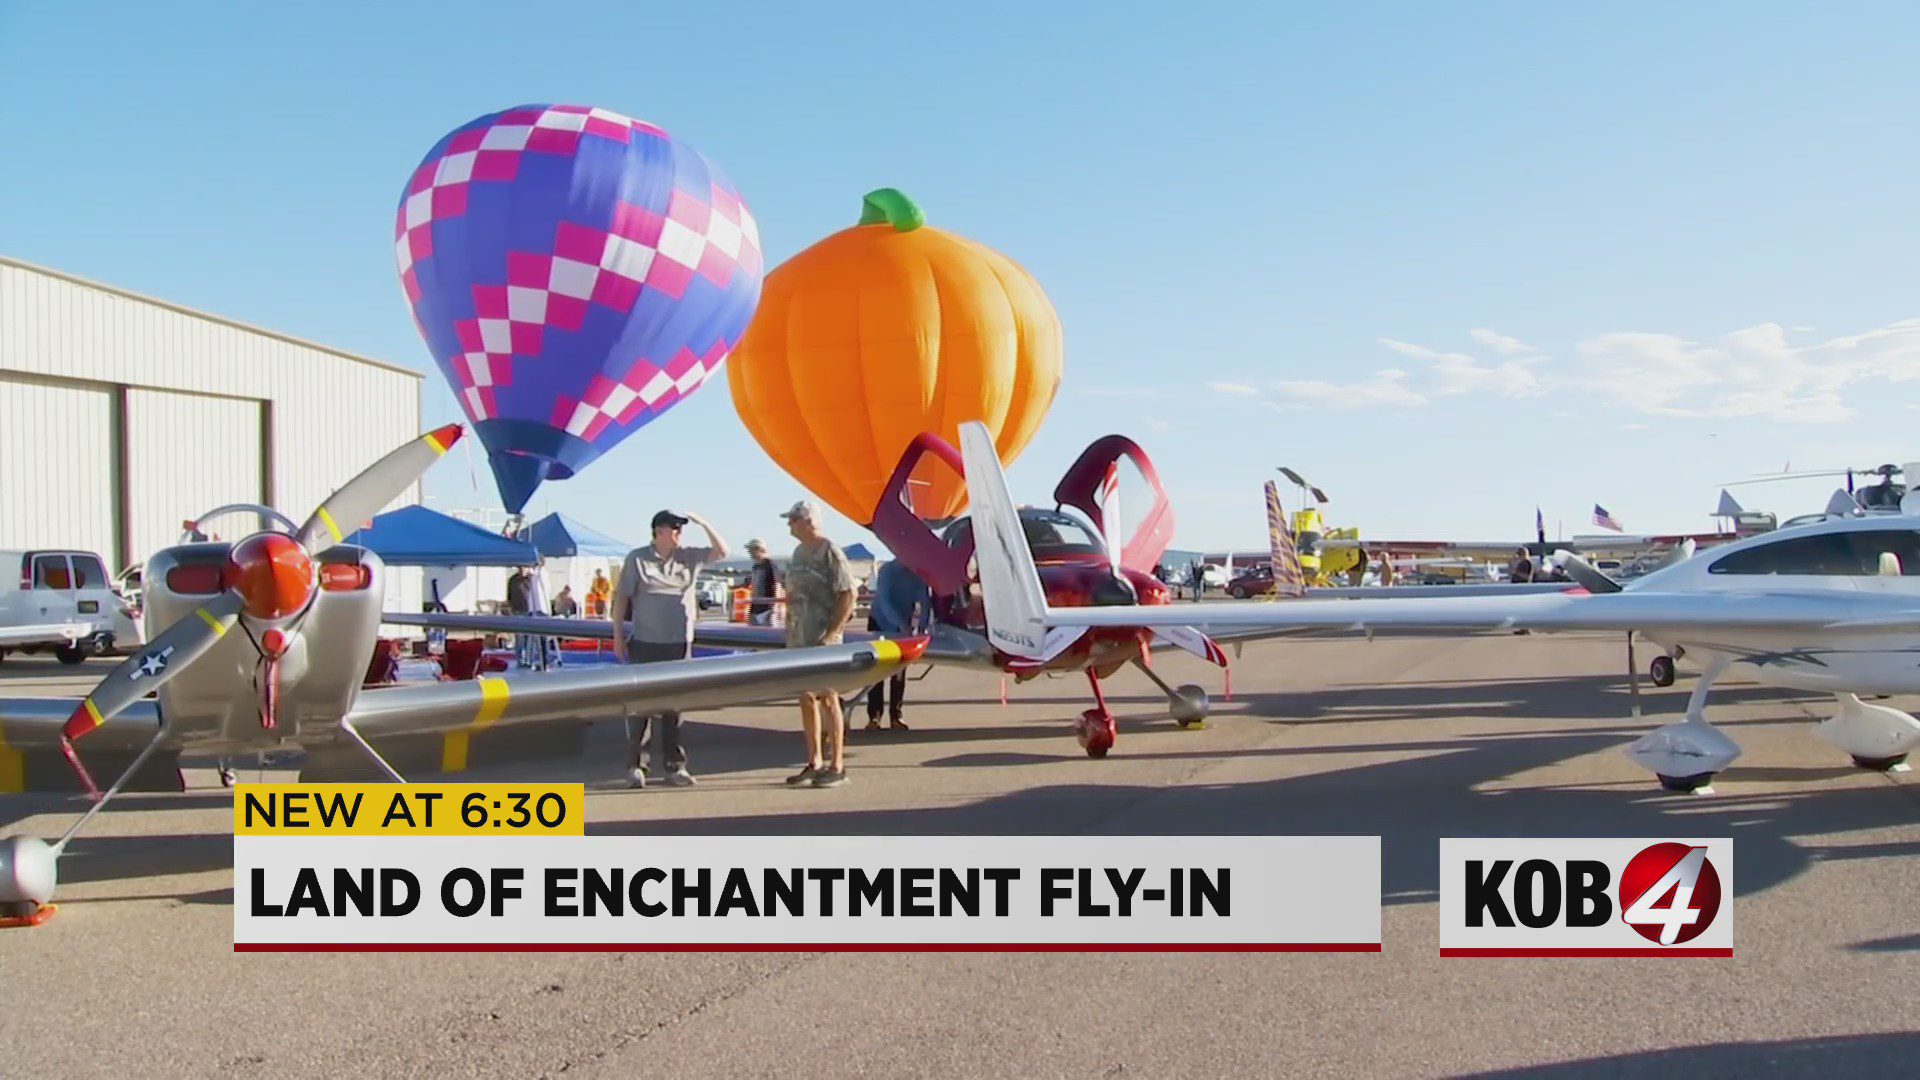 Planes take to the sky in 'Land of Enchantment Fly-In' event